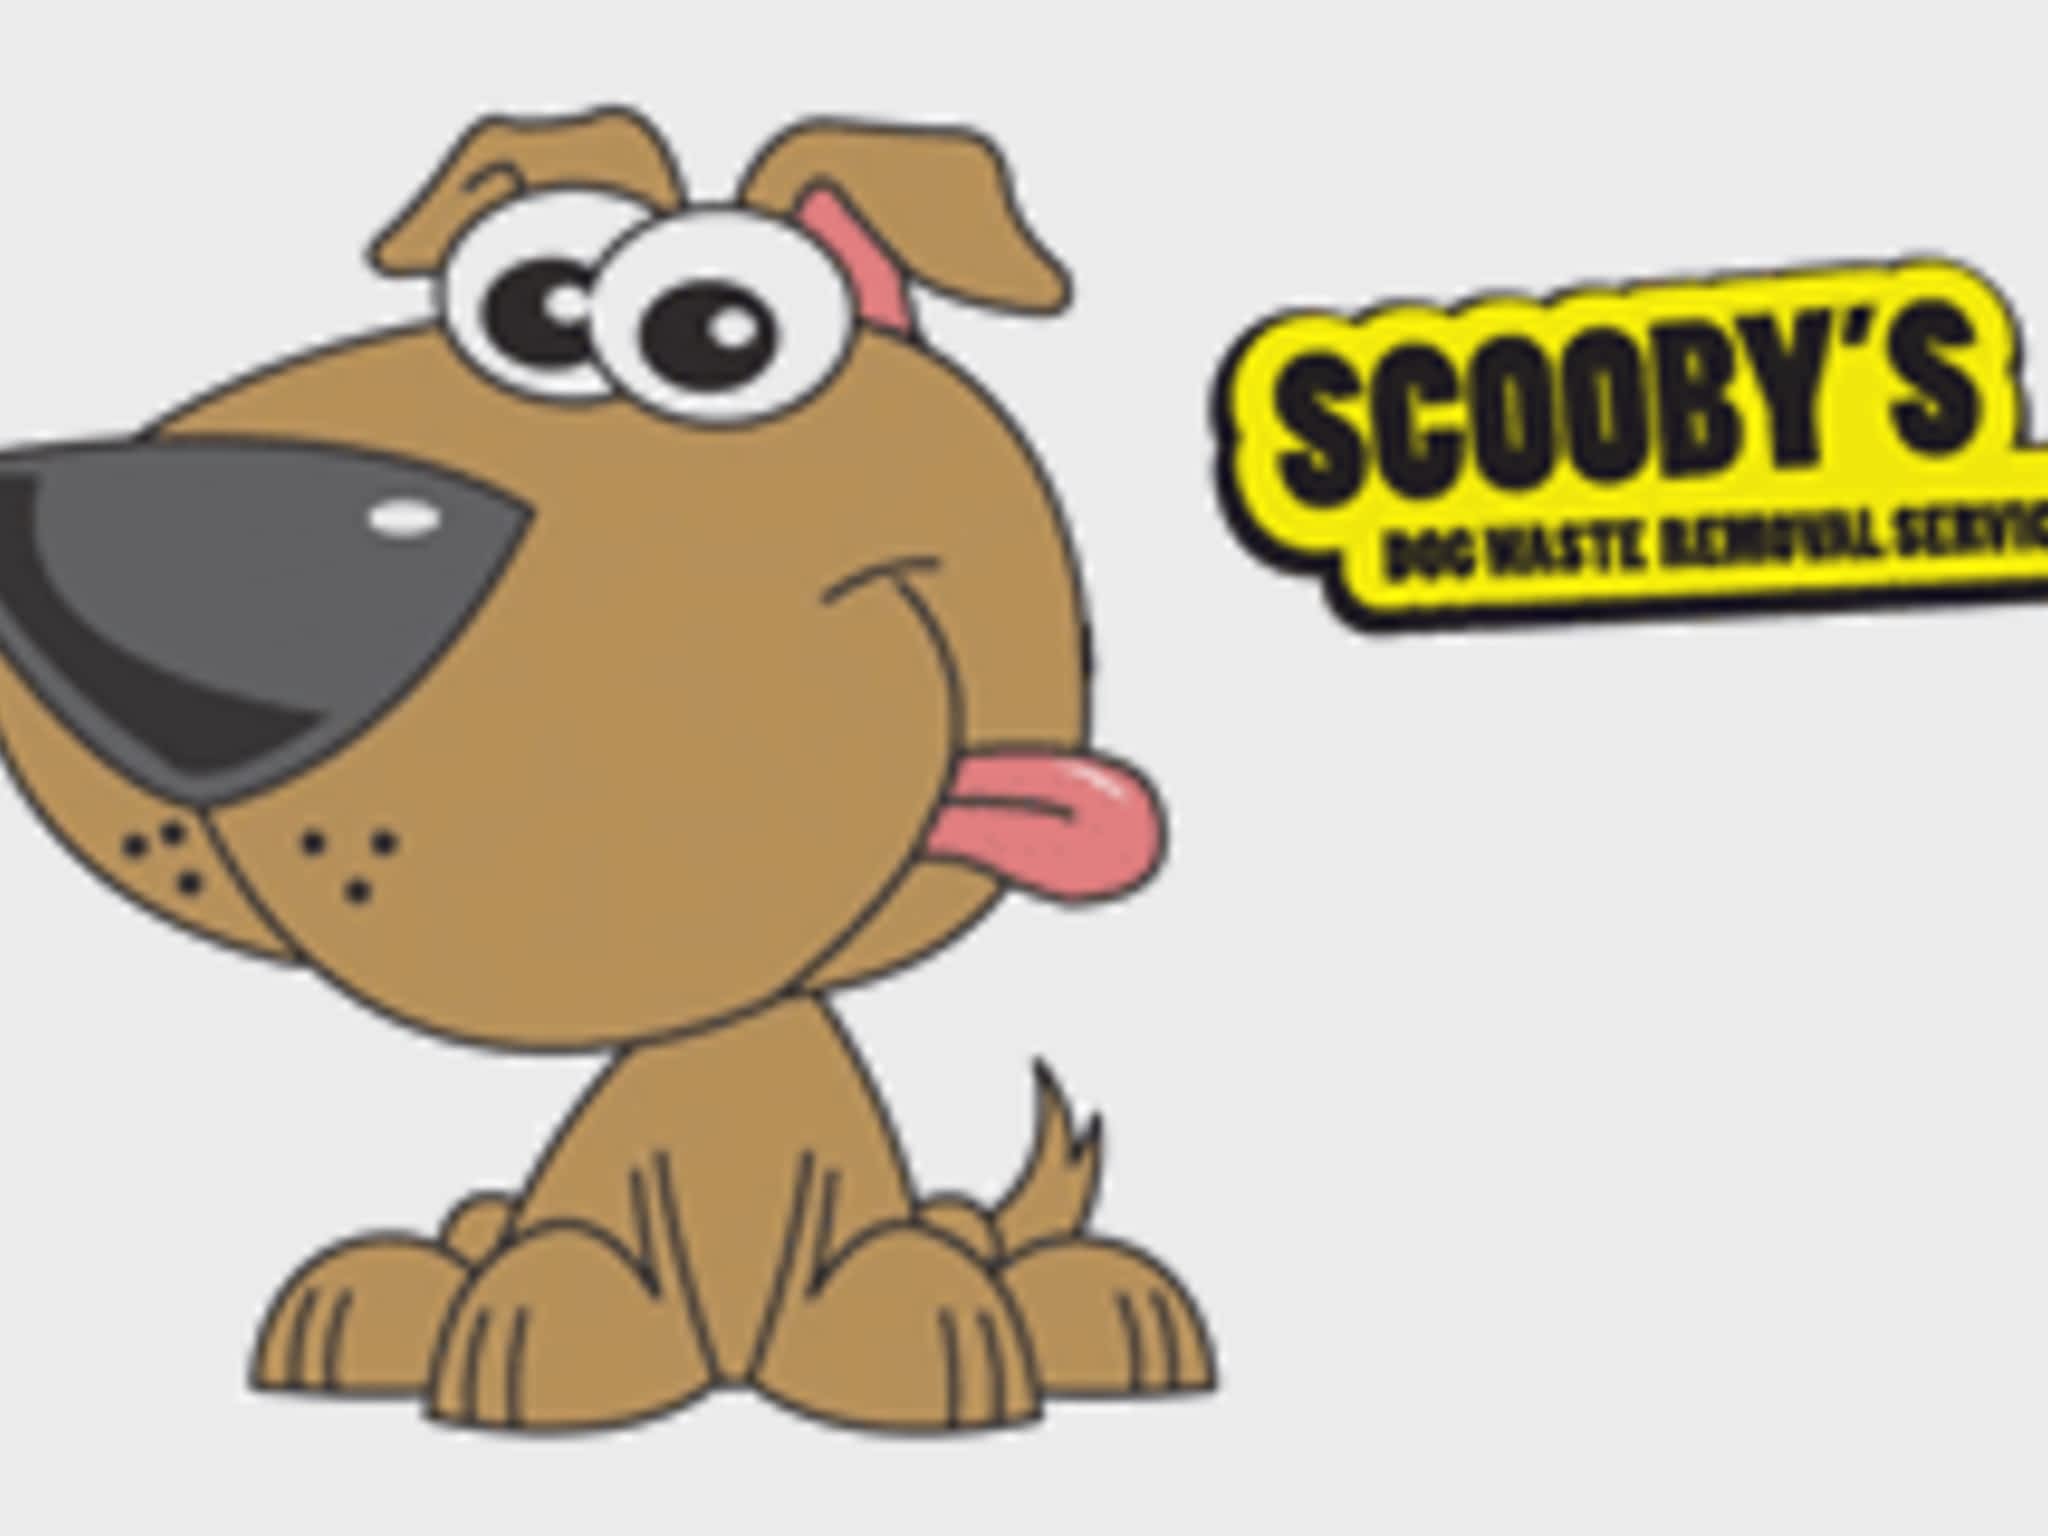 photo Scooby's Dog Waste Removal Service